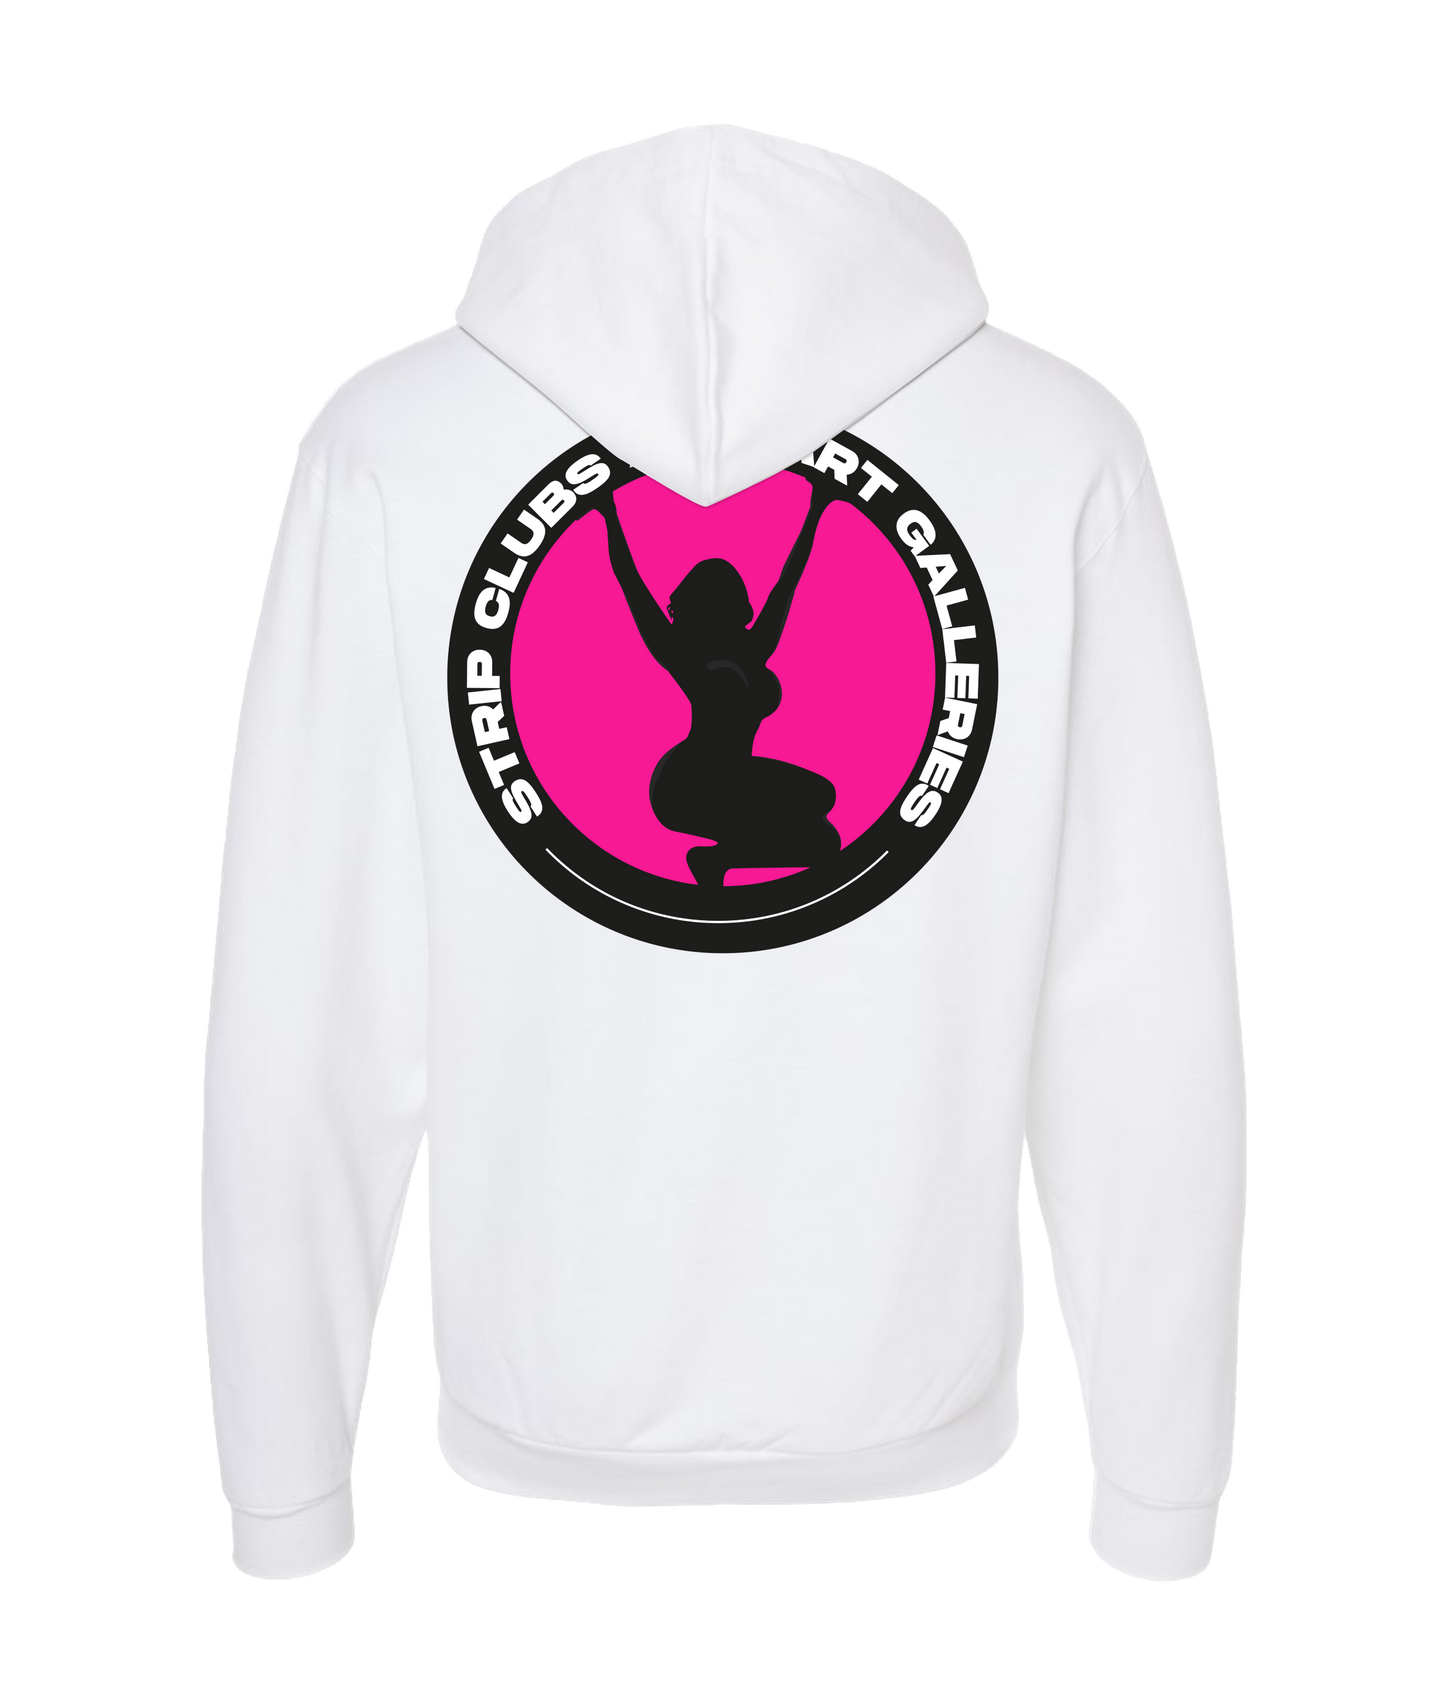 StripClubs and Art Galleries - Patch Tee - White Zip Up Hoodie